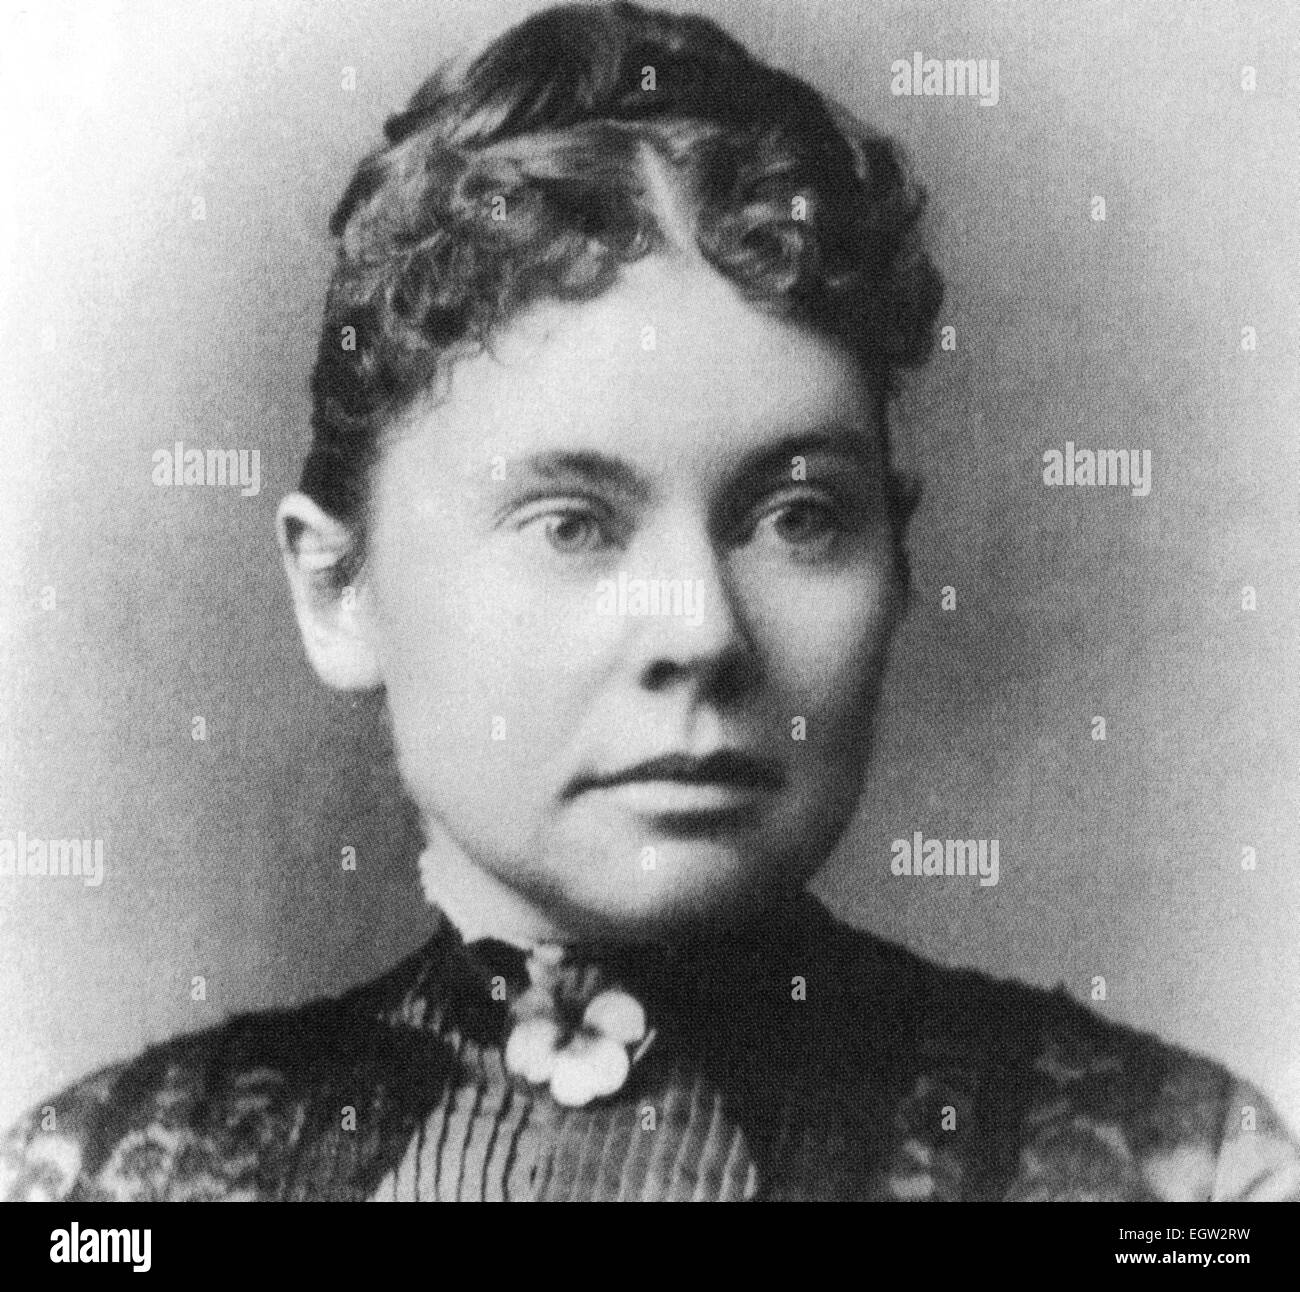 LIZZIE BORDEN (1860-1927) American woman tried and acquitted for axe murders in 1892. Stock Photo